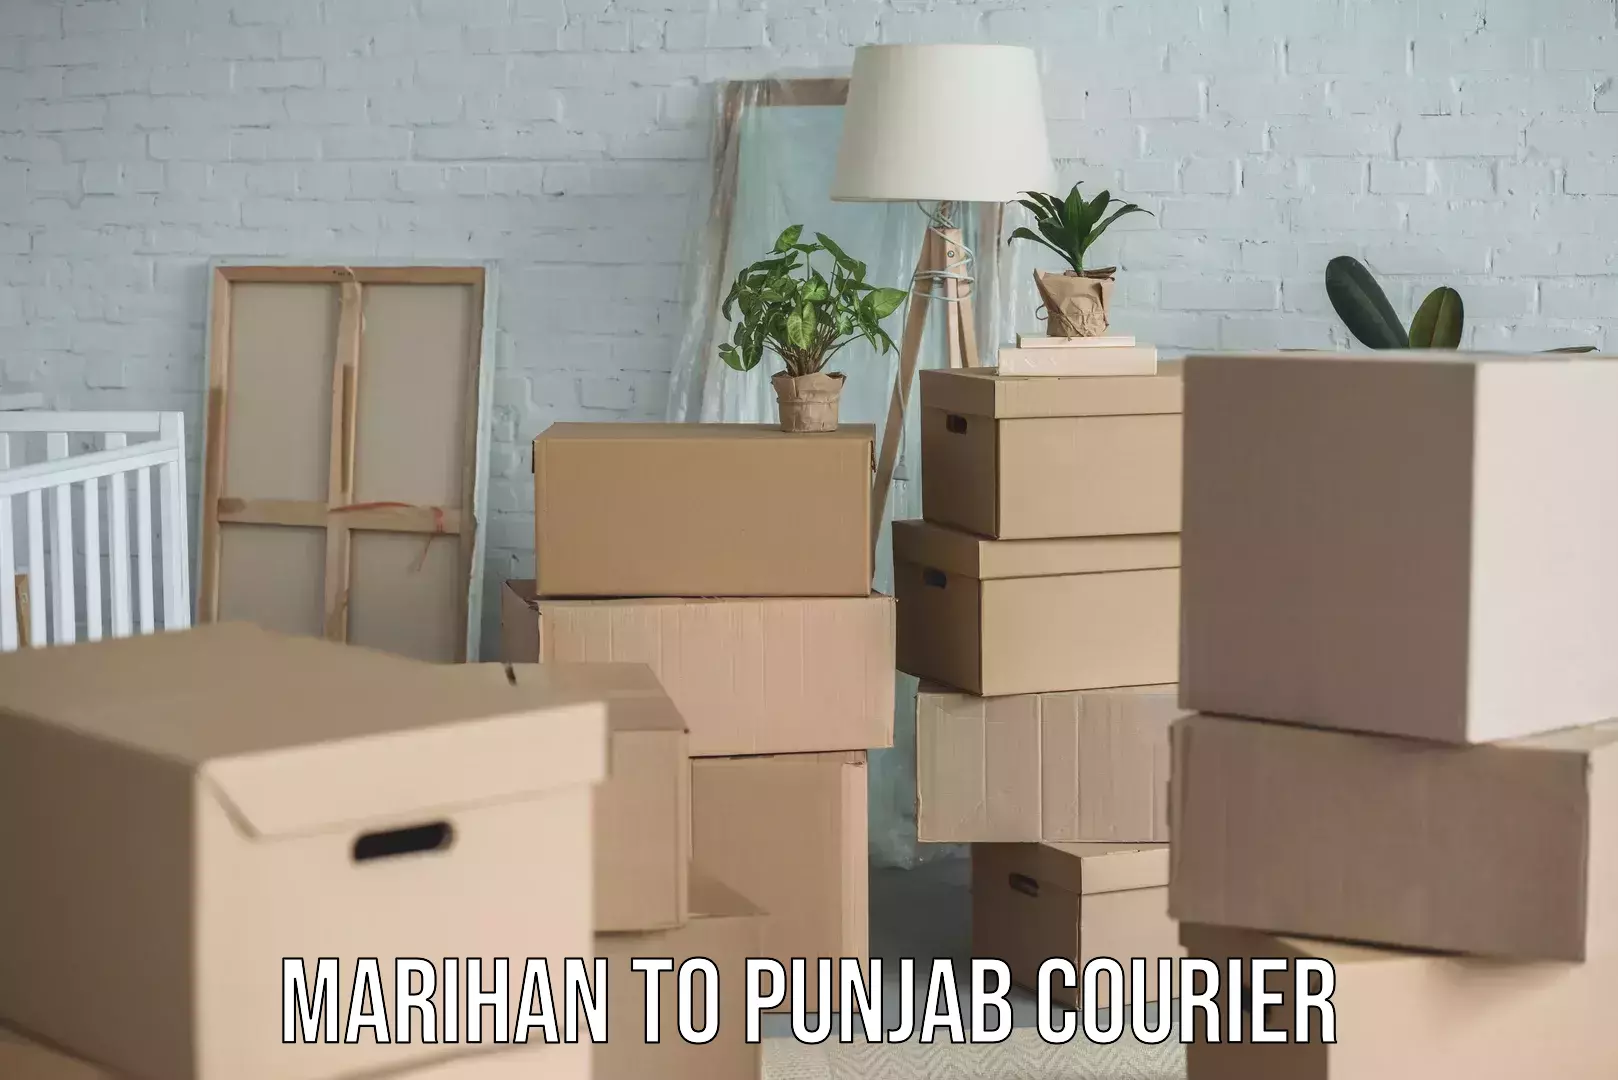 Furniture movers and packers Marihan to Punjab